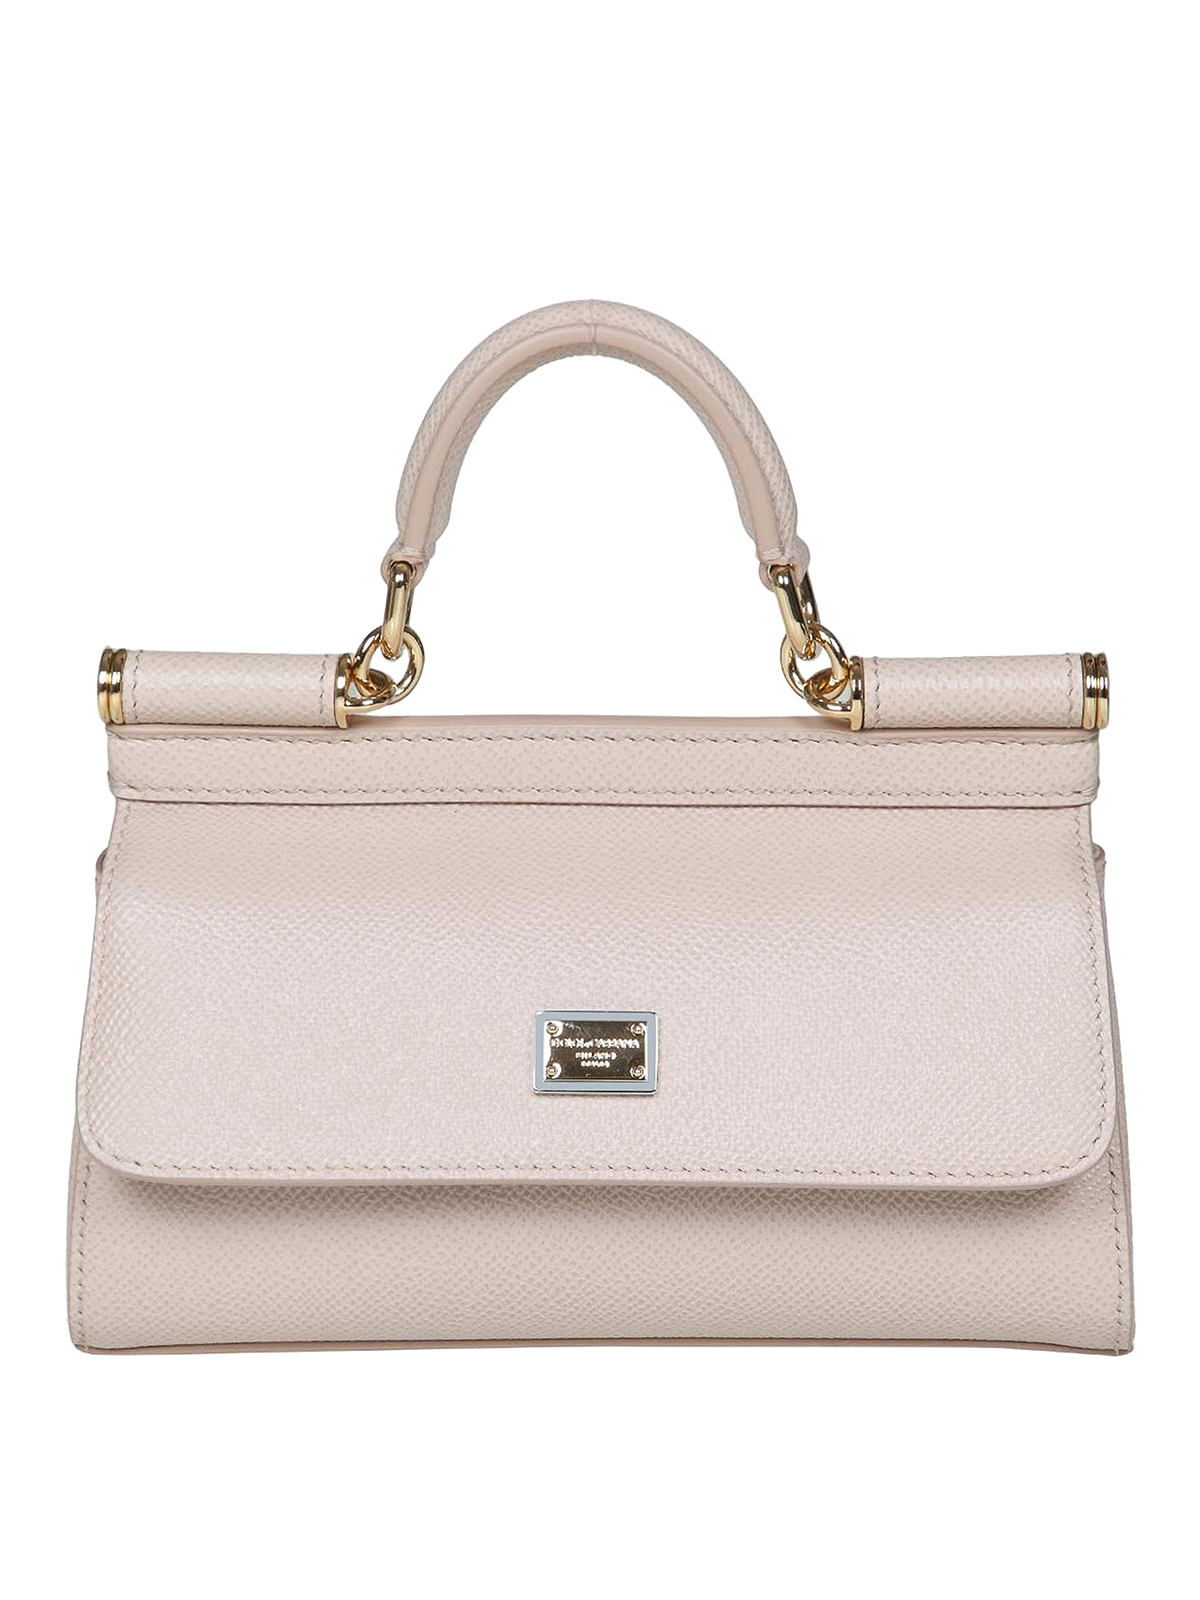 Dolce & Gabbana Small Leather Sicily Bag With Shoulder Strap In Pink